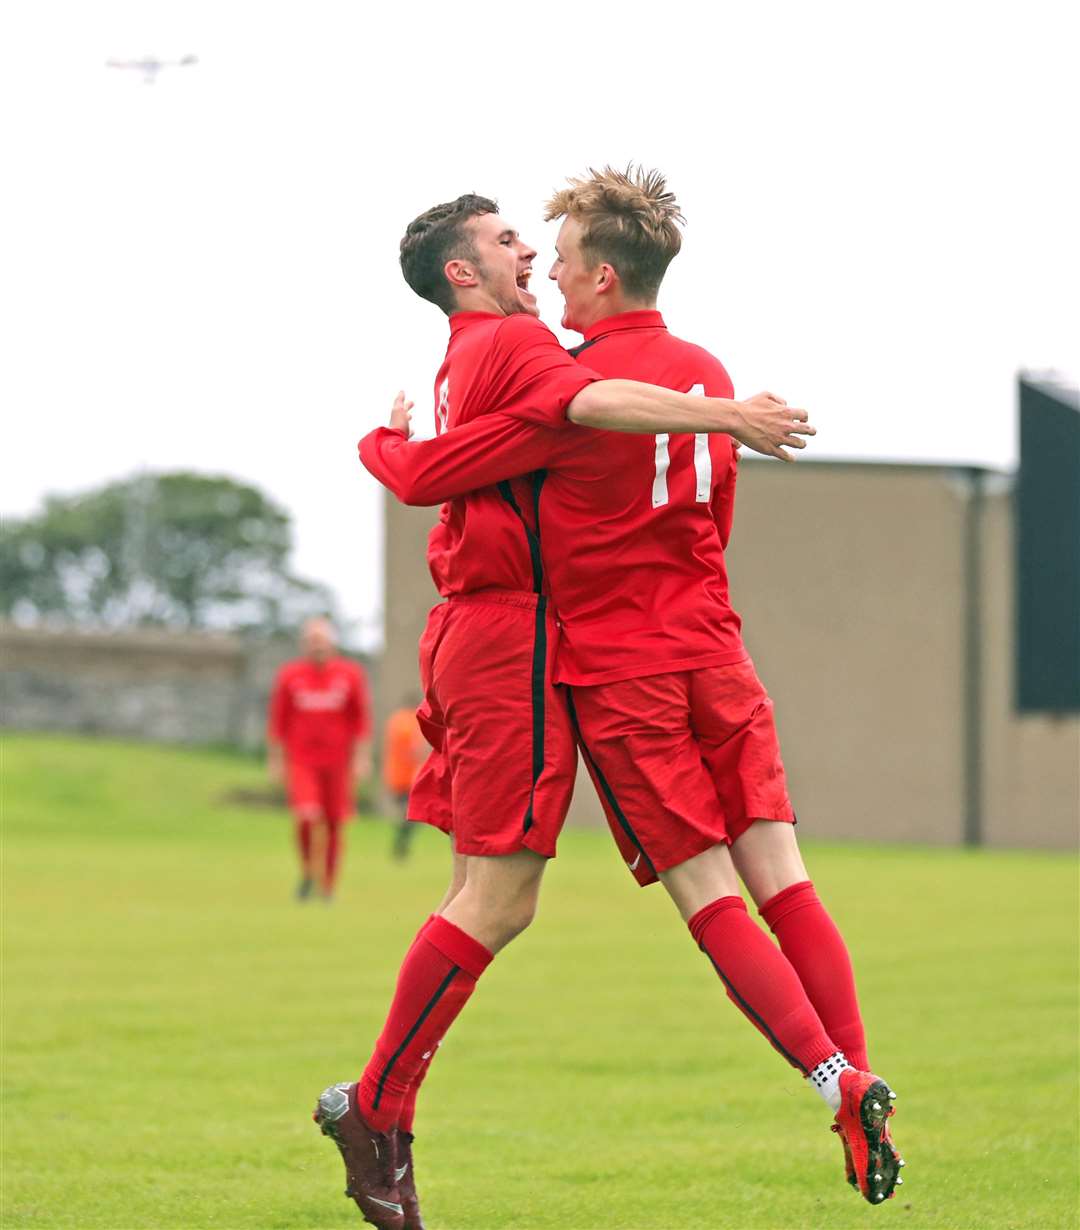 Wick Groats' Mark Macadie (number 11) is congratulated by Ben Sinclair on scoring their first goal during the 4-3 David Allan quarter-final win against Pentland United. Picture: James Gunn